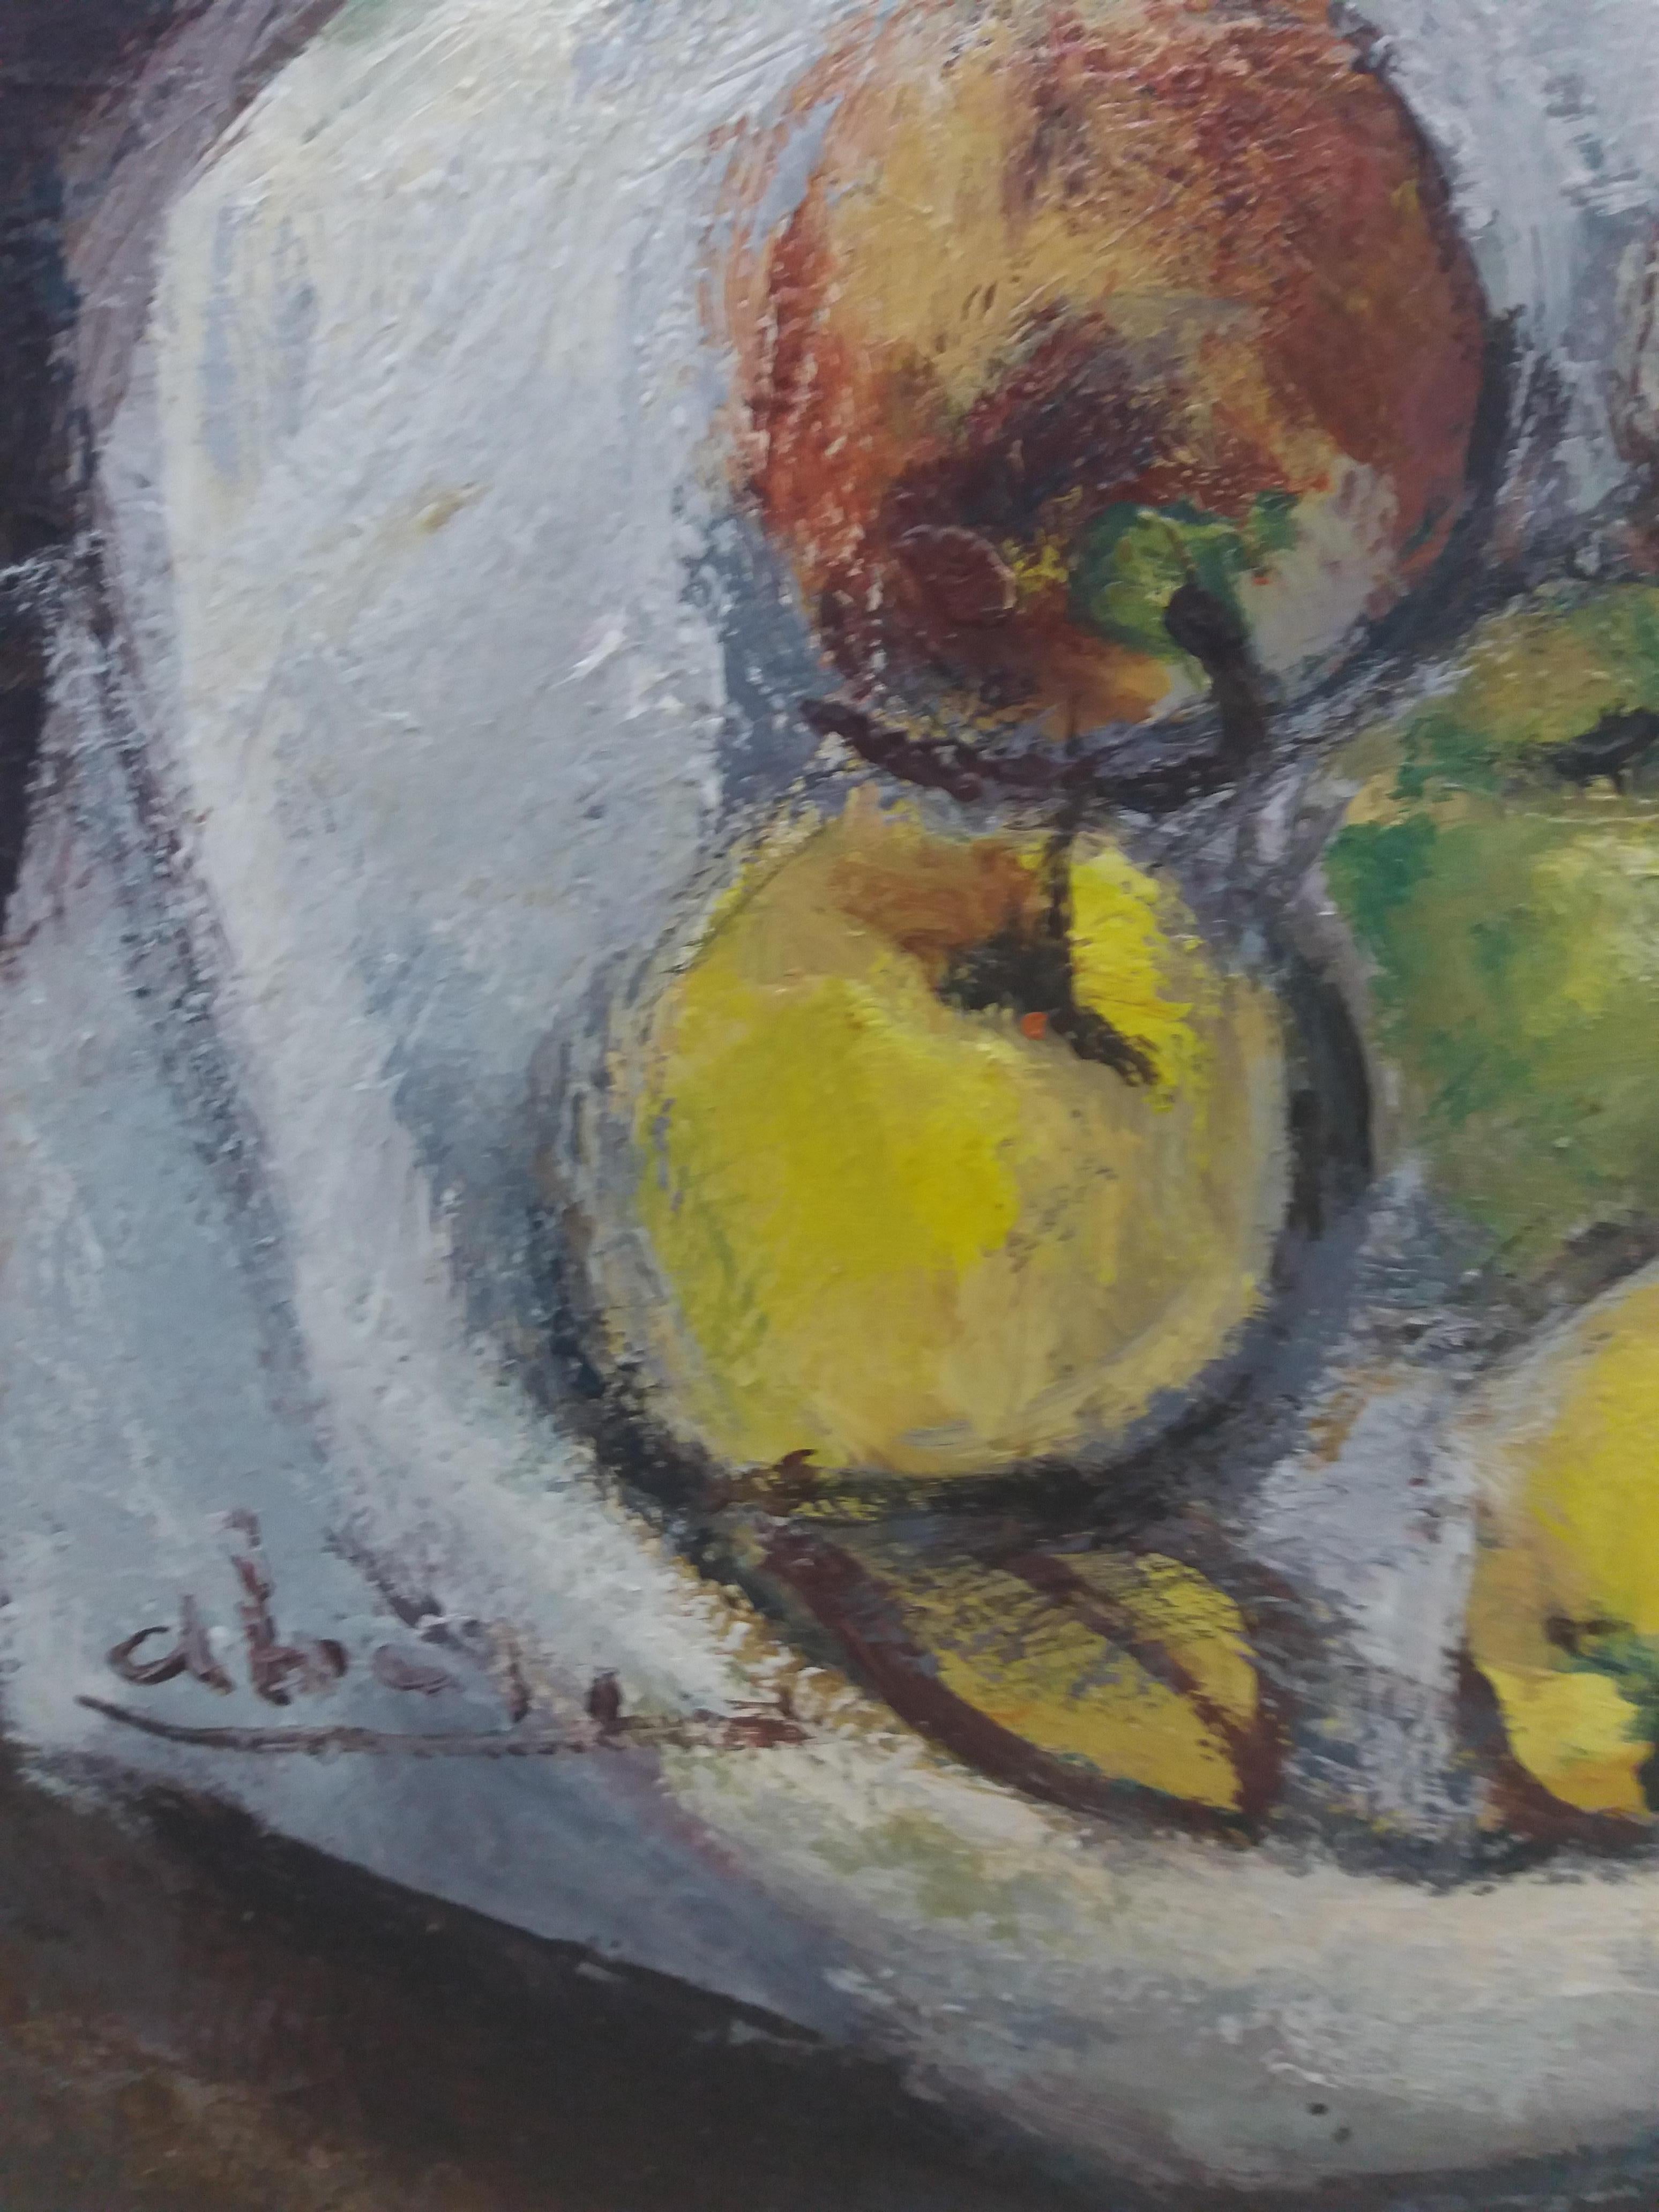  Abella  Fruits  Vertical   original still life Cubist acrylic painting For Sale 5